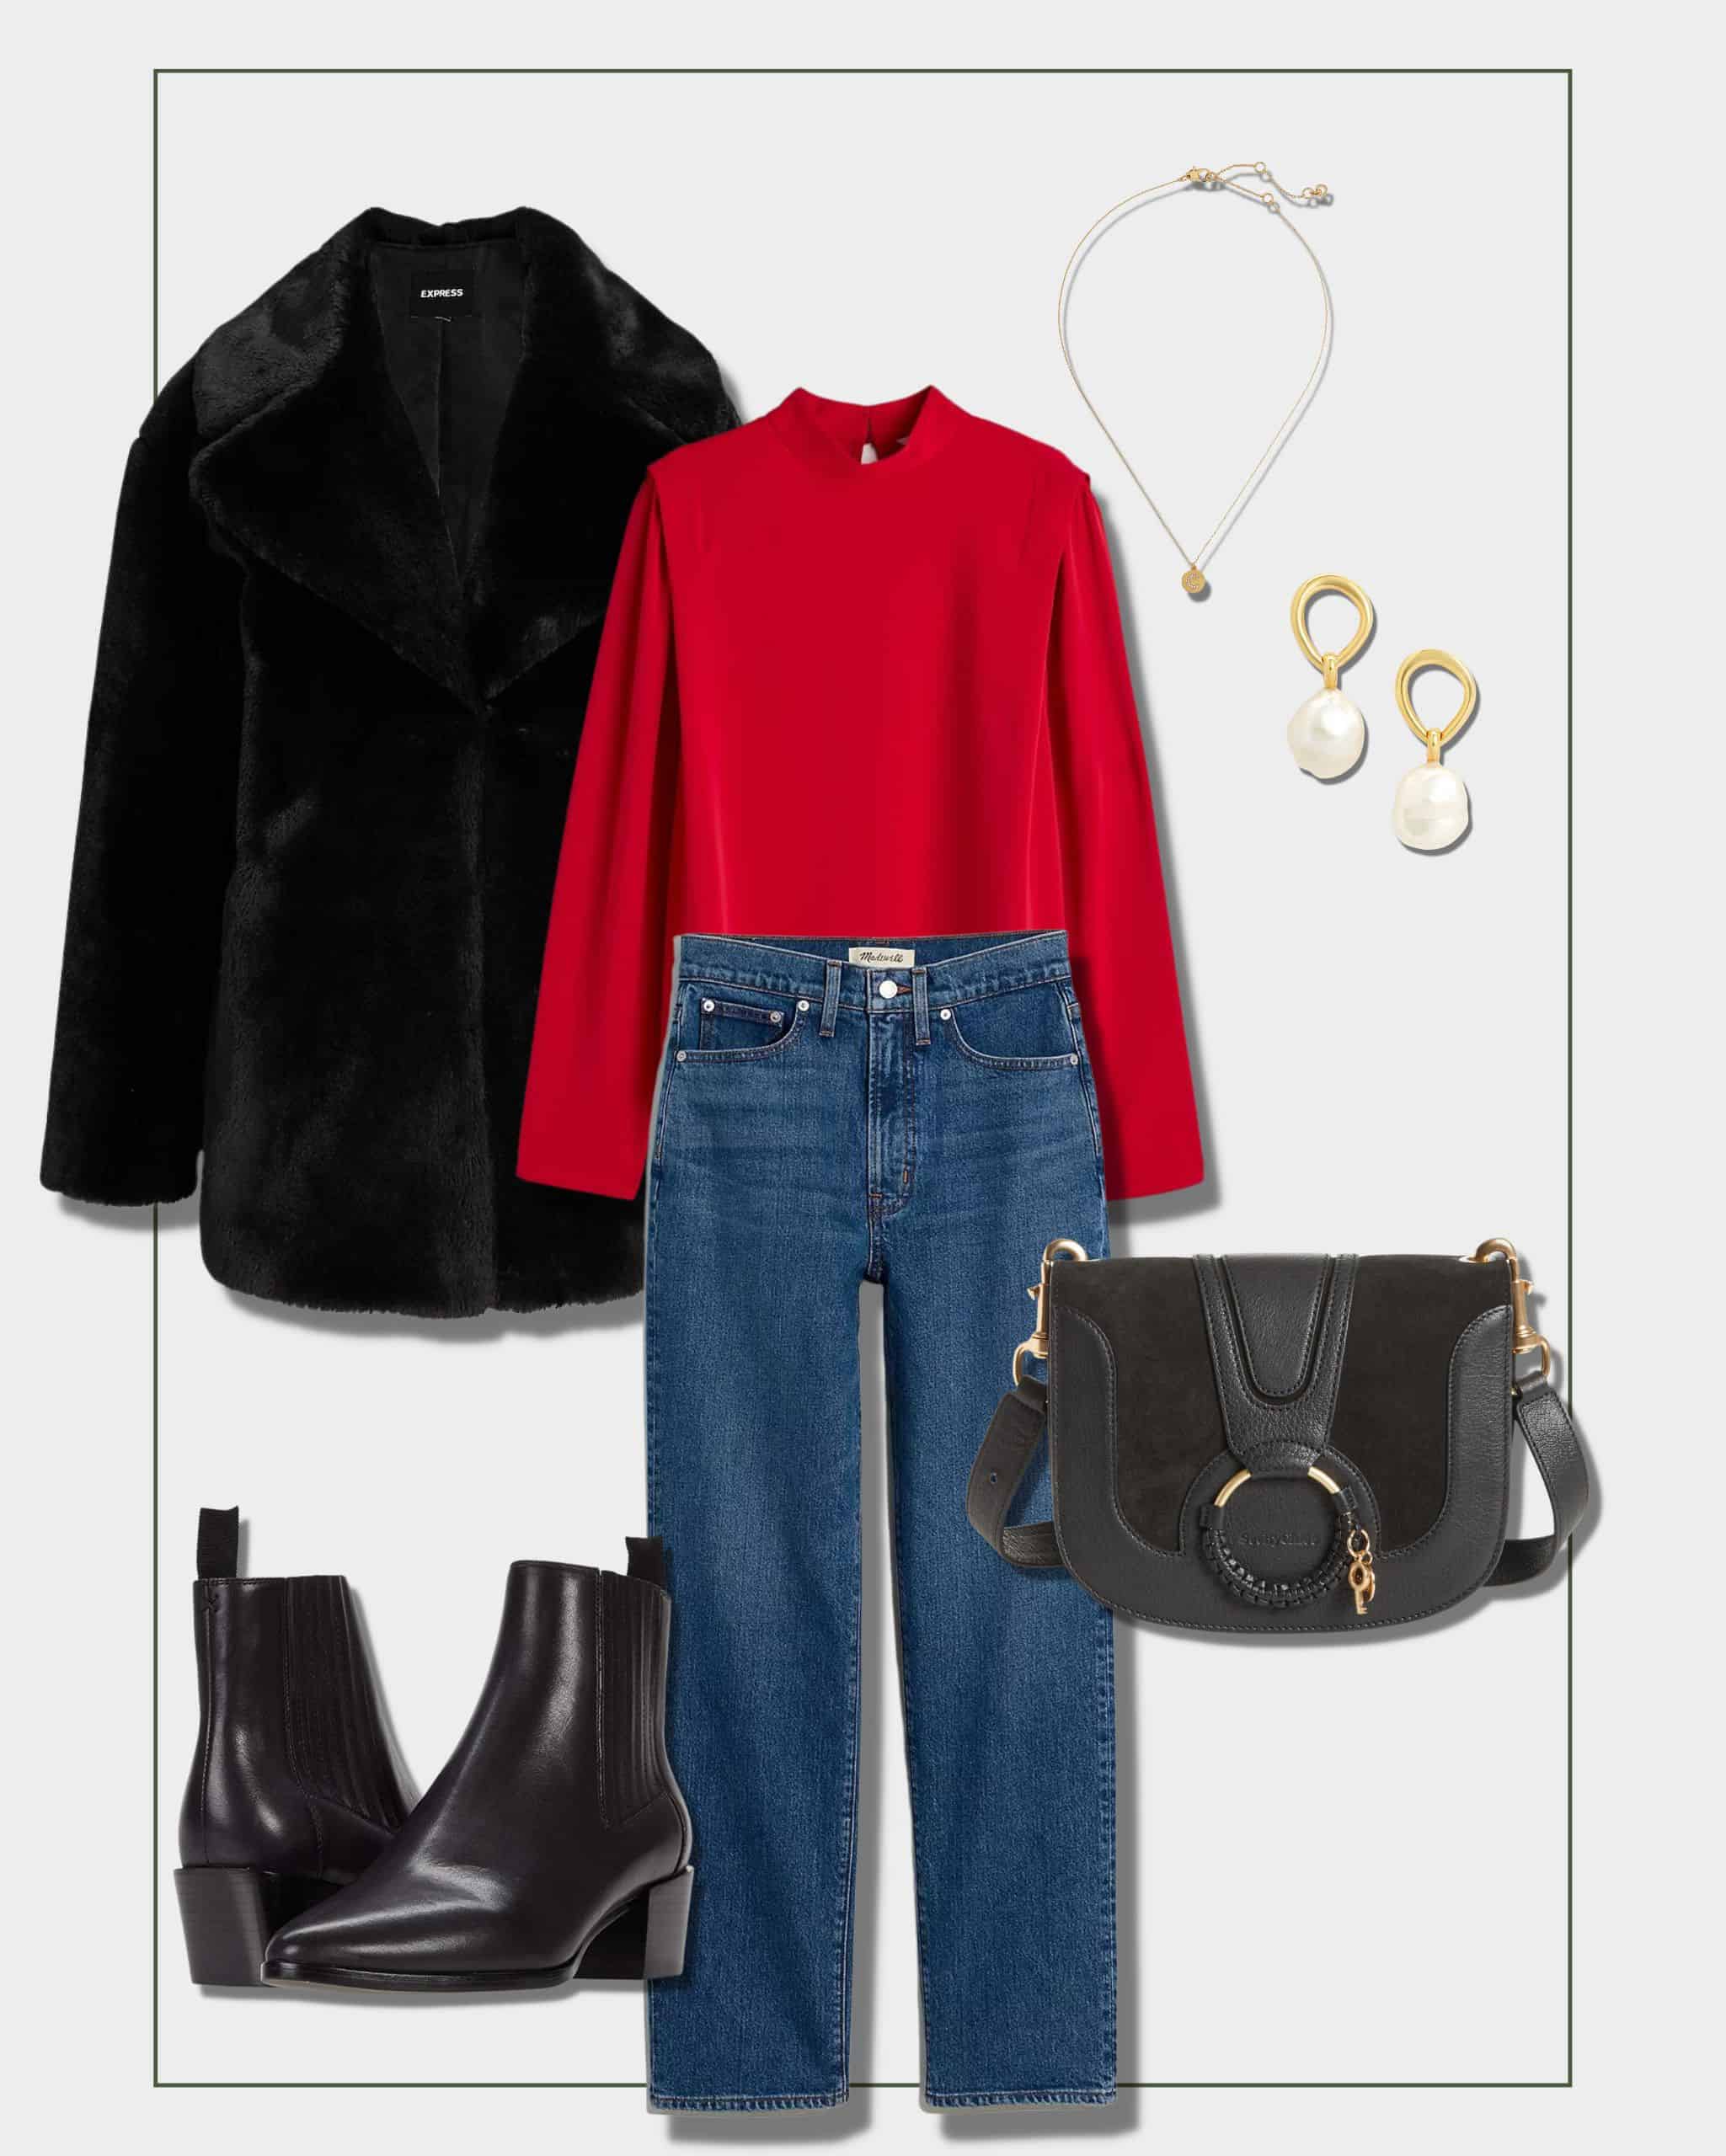 Christmas holiday outfit with satin blouse, faux fur coat, blue jeans and ankle boots